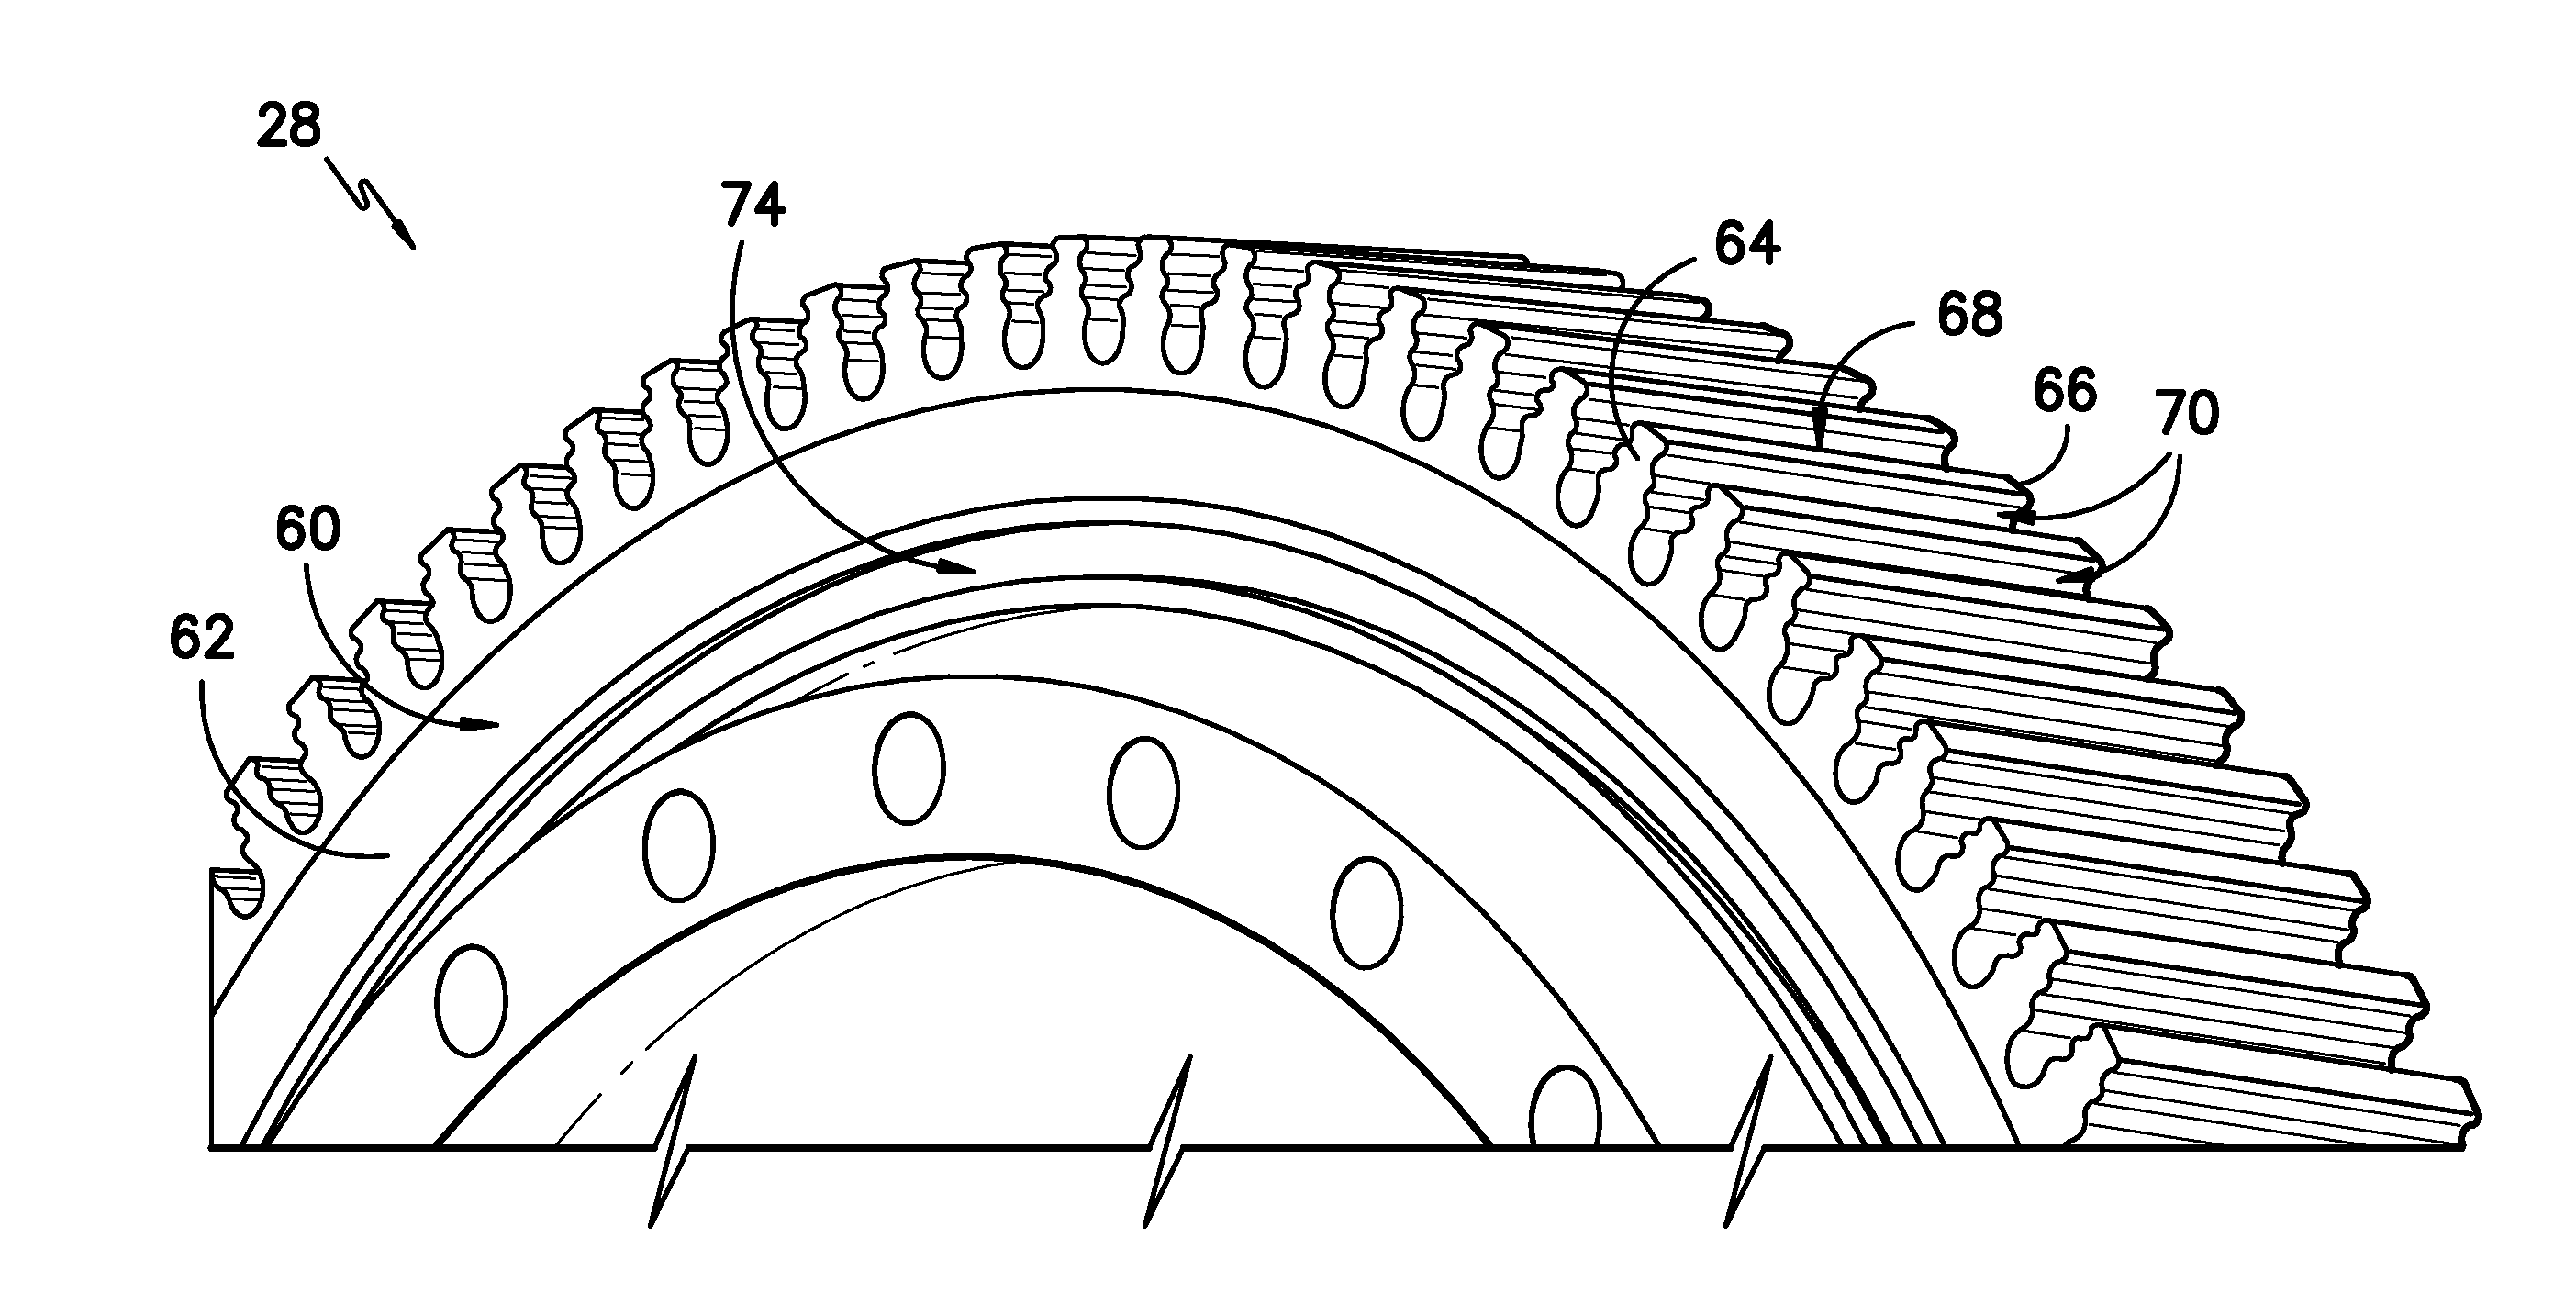 Modified rotor component and method for modifying a wear characteristic of a rotor component in a turbine system